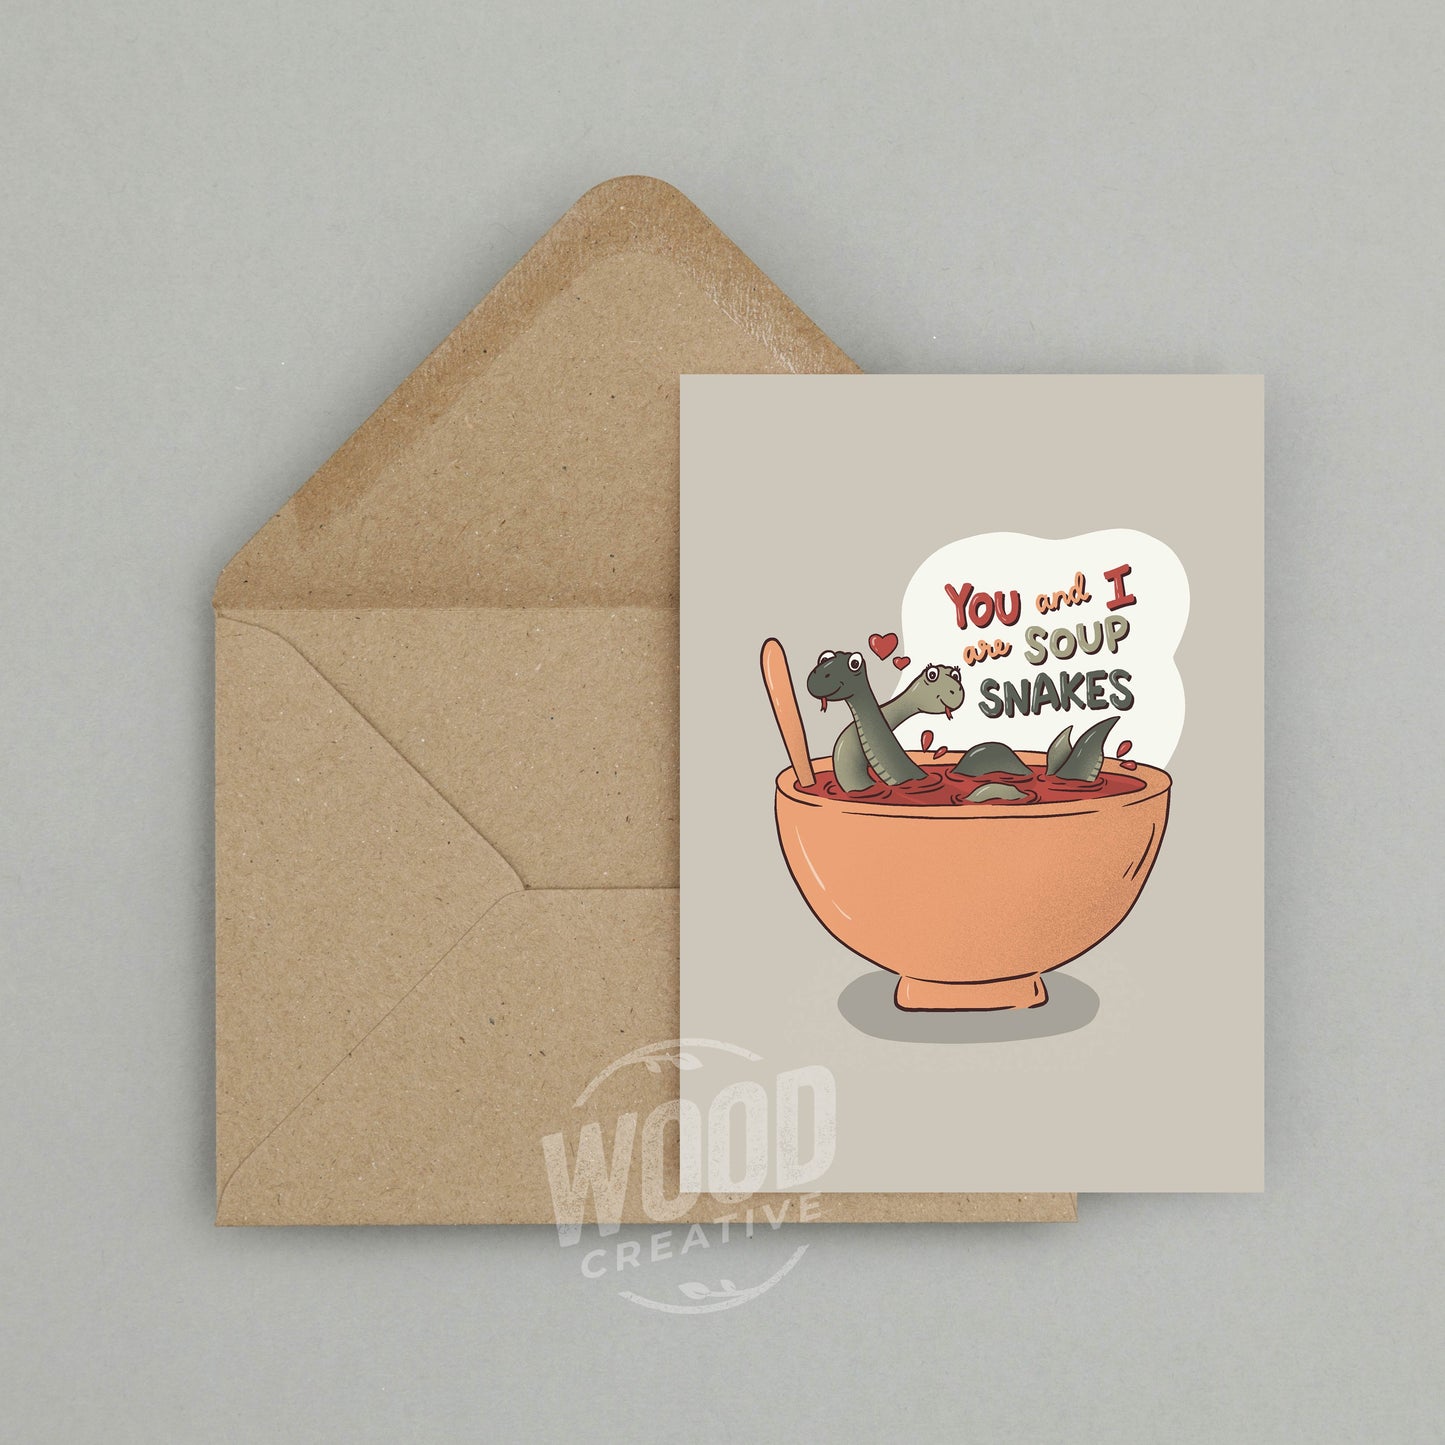 You And I Are Soup Snakes Greeting Card